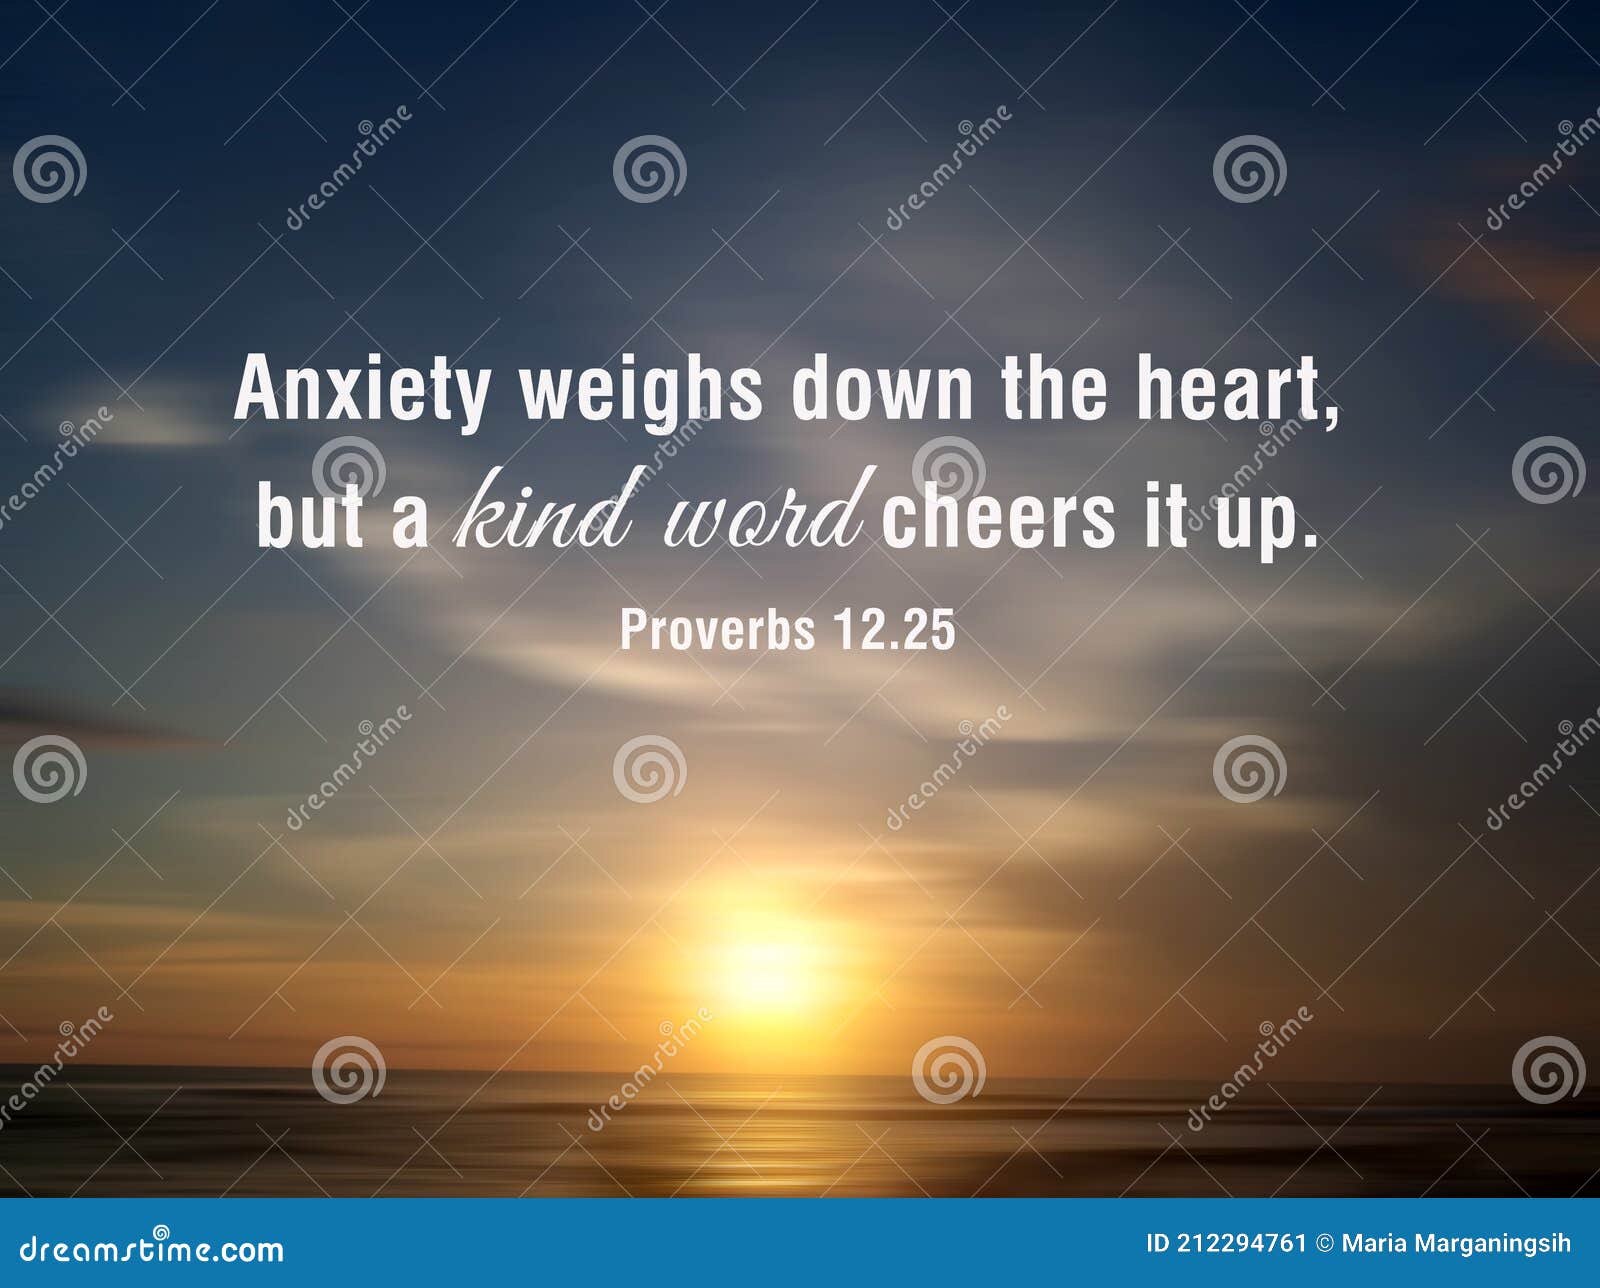 anxiety weighs down the heart, but a kind word cheers it up. proverbs 12:25.  faith and bible inspirational quote with sunset